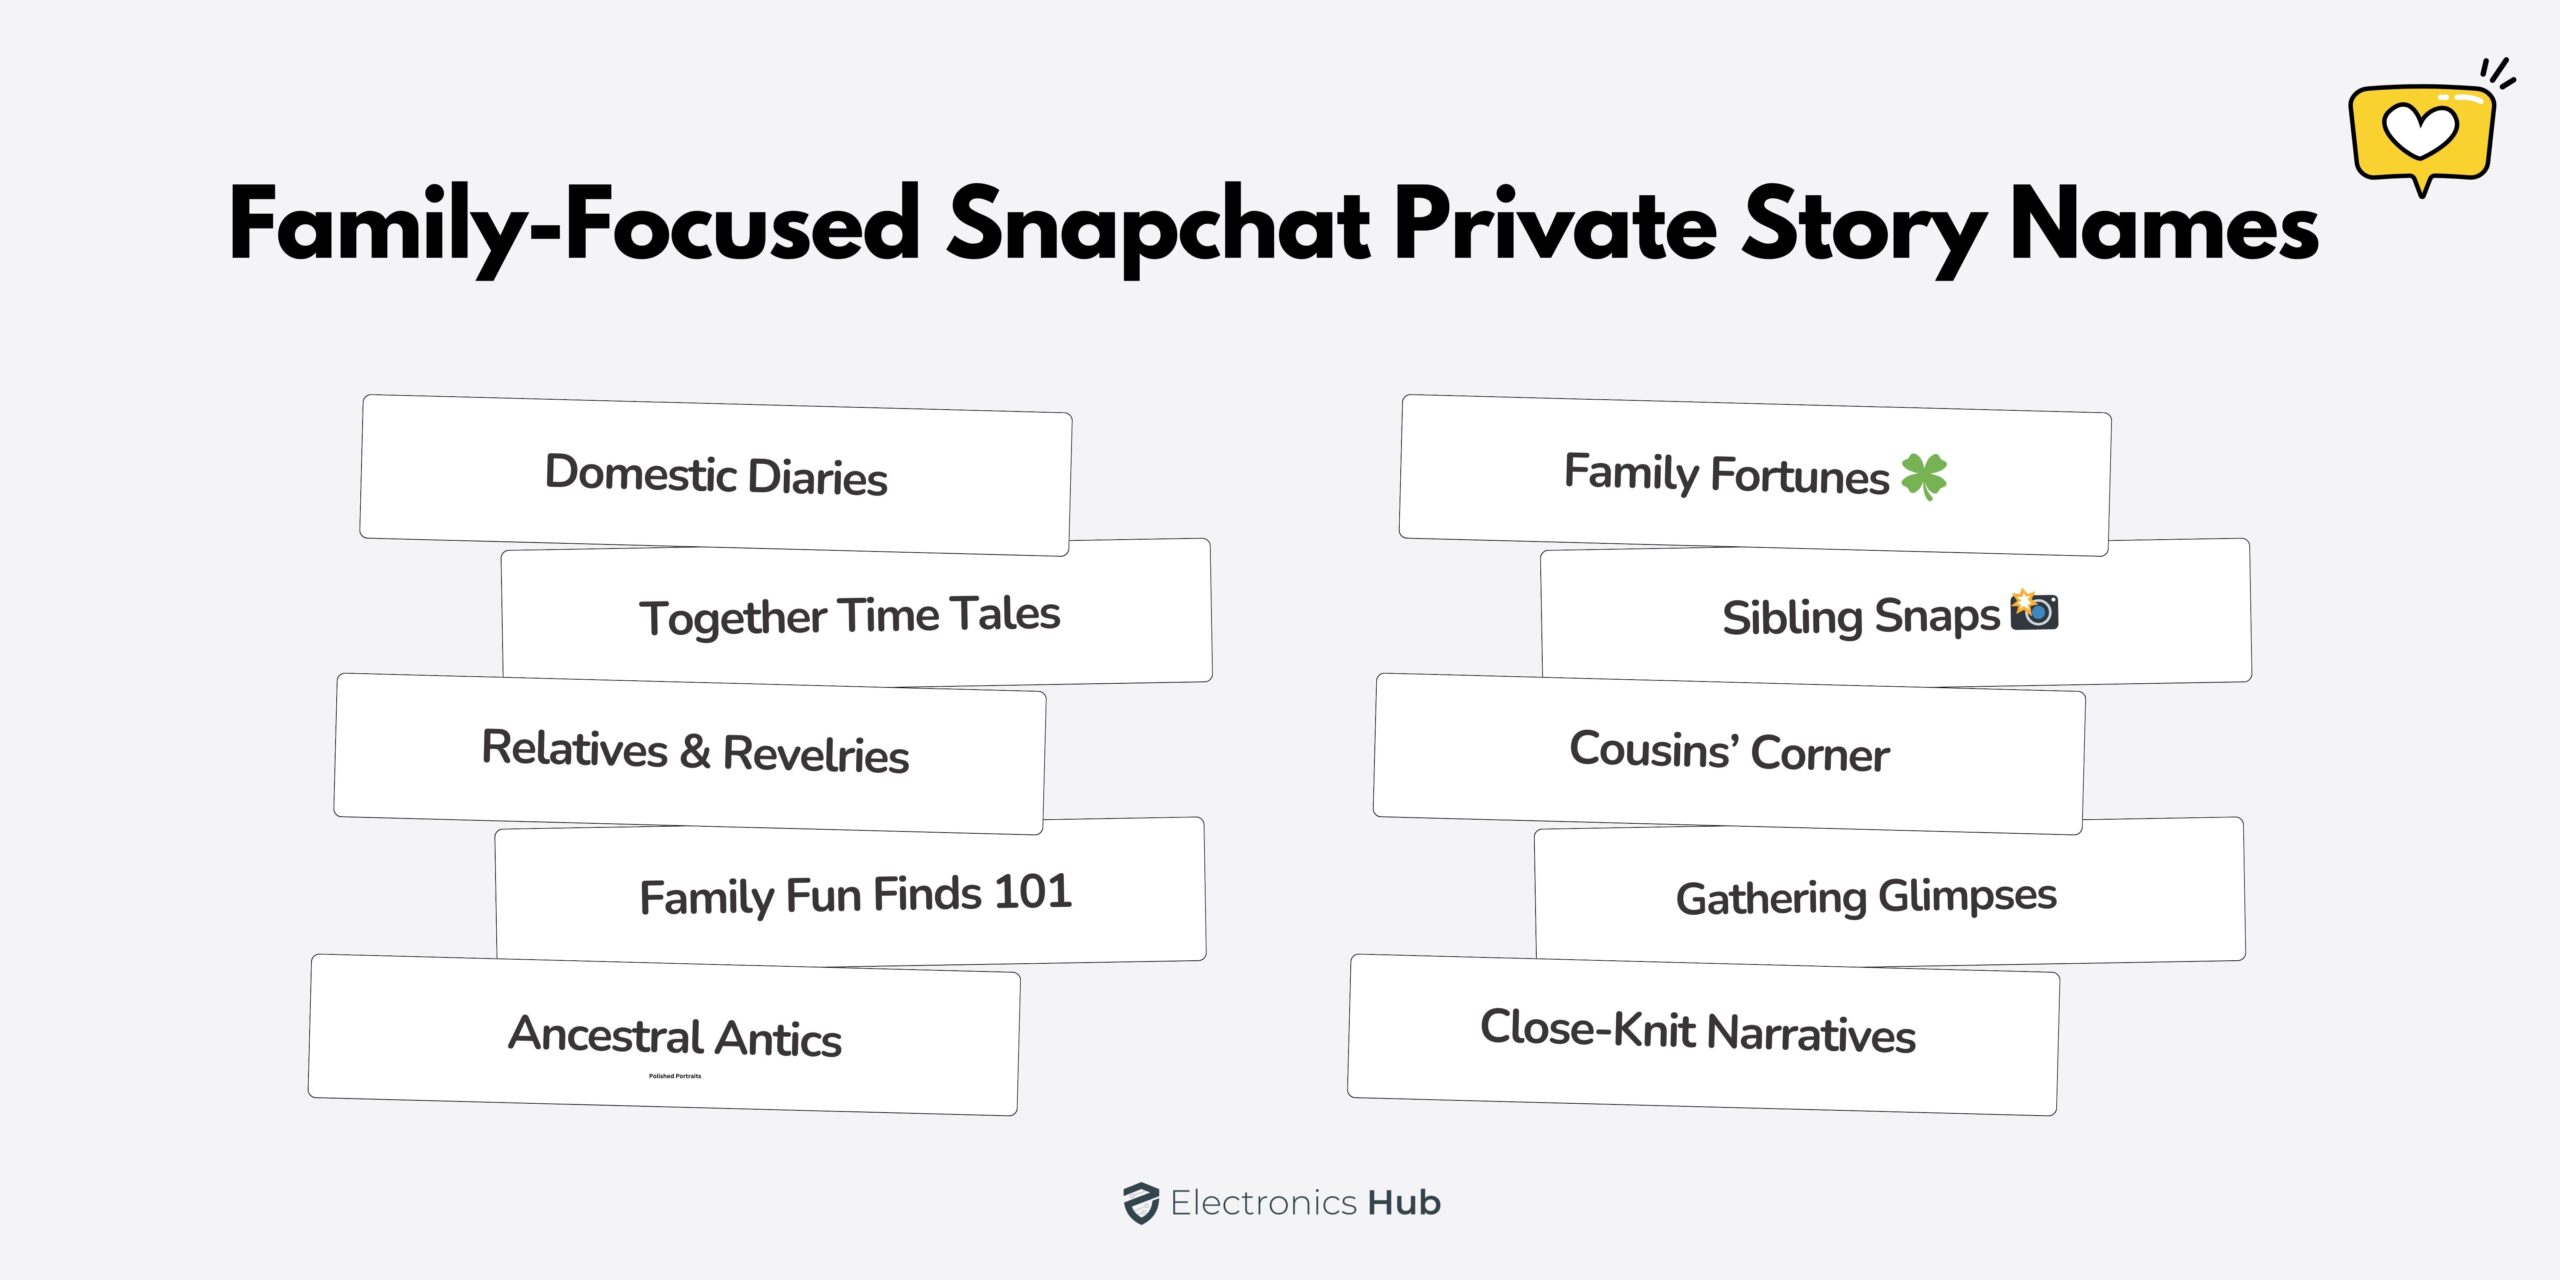 Family-Focused Snapchat Private Story Names